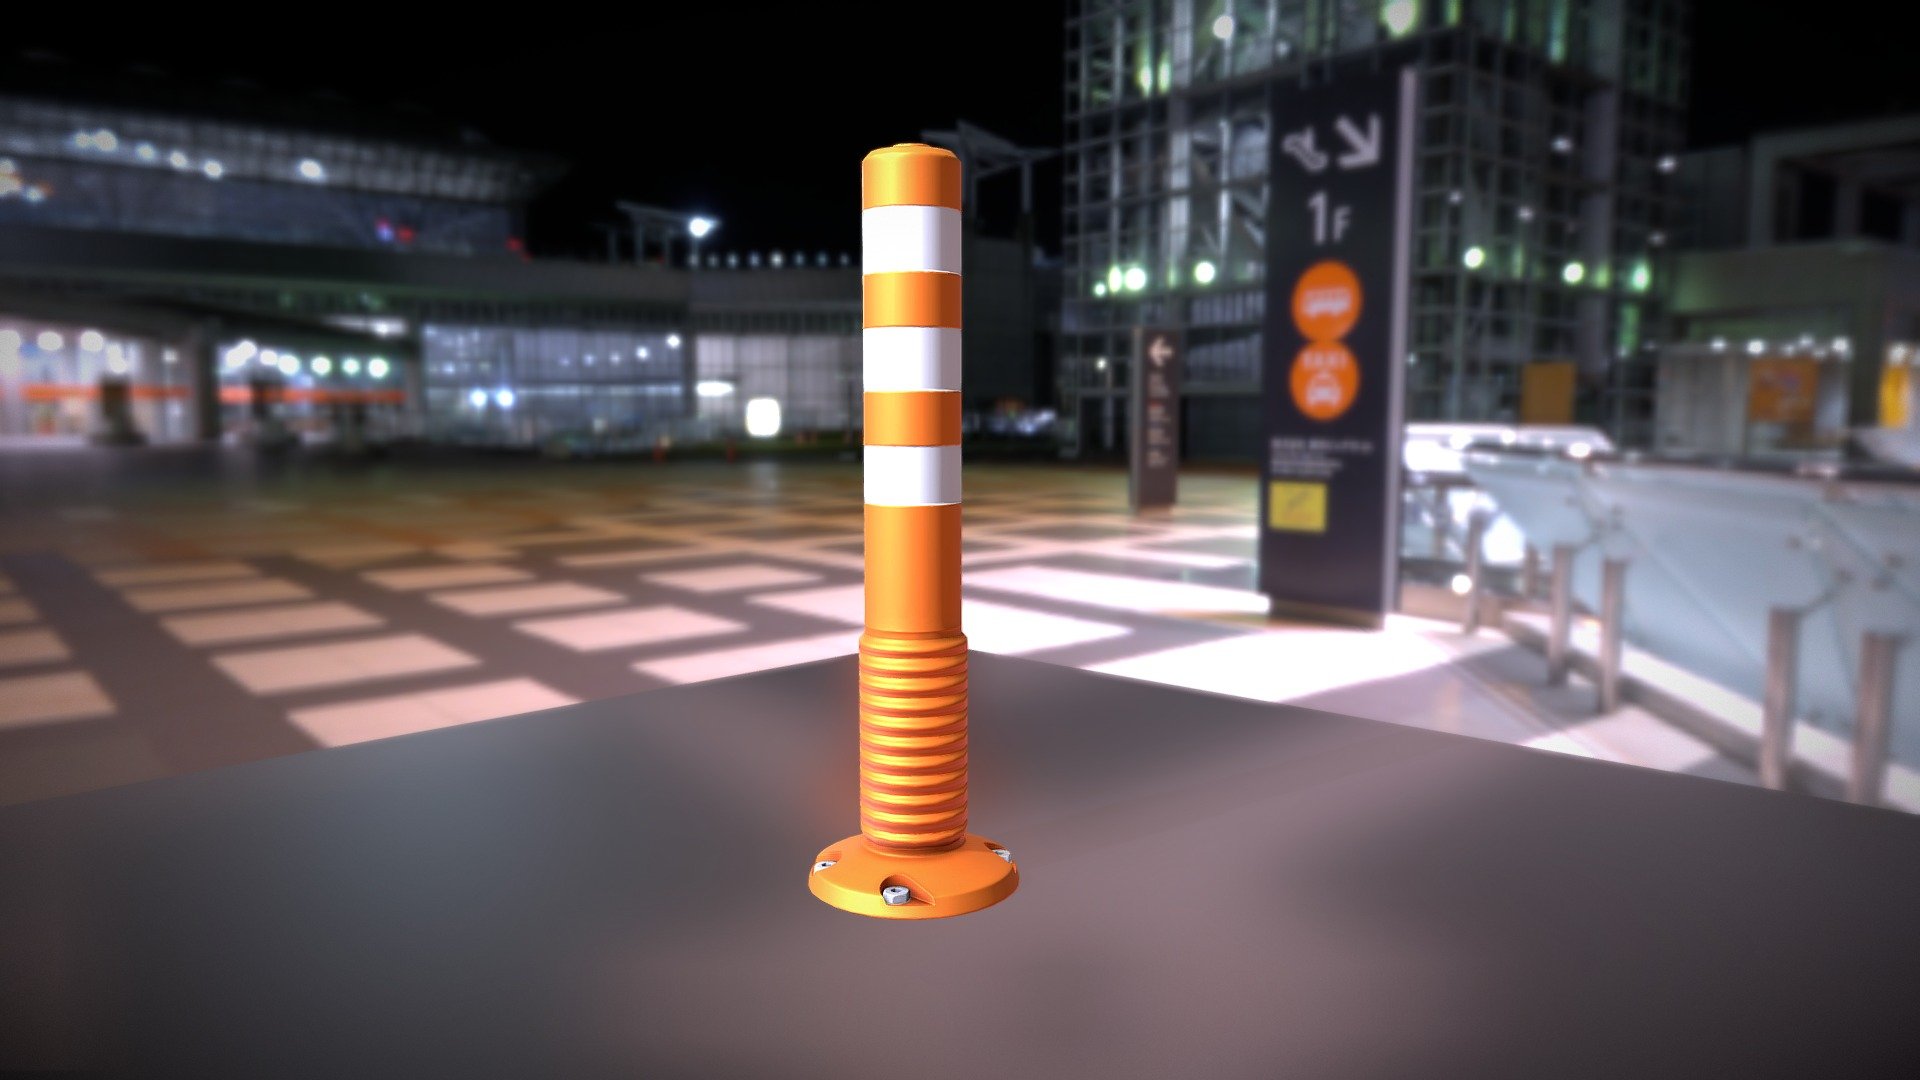 Here is the 750mm version of an low-poly traffic delineator from Germany.

Maybe interesting for city planning or video games.



Available Textures:

-Diffuse map
-Normal map



Available formats:

Collada (.dae)

DirectX (.X)

X3D (.x3d)

Autodesk FBX (.fbx)

Alias/WaveFront Material (.mtl)

OBJ (.obj)

Blender (.blend)

3D Studio (.3ds)

DXF (.dxf)

Agisoft Photoscan (.ply)

Stereolithography (.stl)

VRML (.wrl, .wrz)


 - Traffic Delineator Flexipoller (750mm) low-poly - Buy Royalty Free 3D model by VIS-All-3D (@VIS-All) 3d model